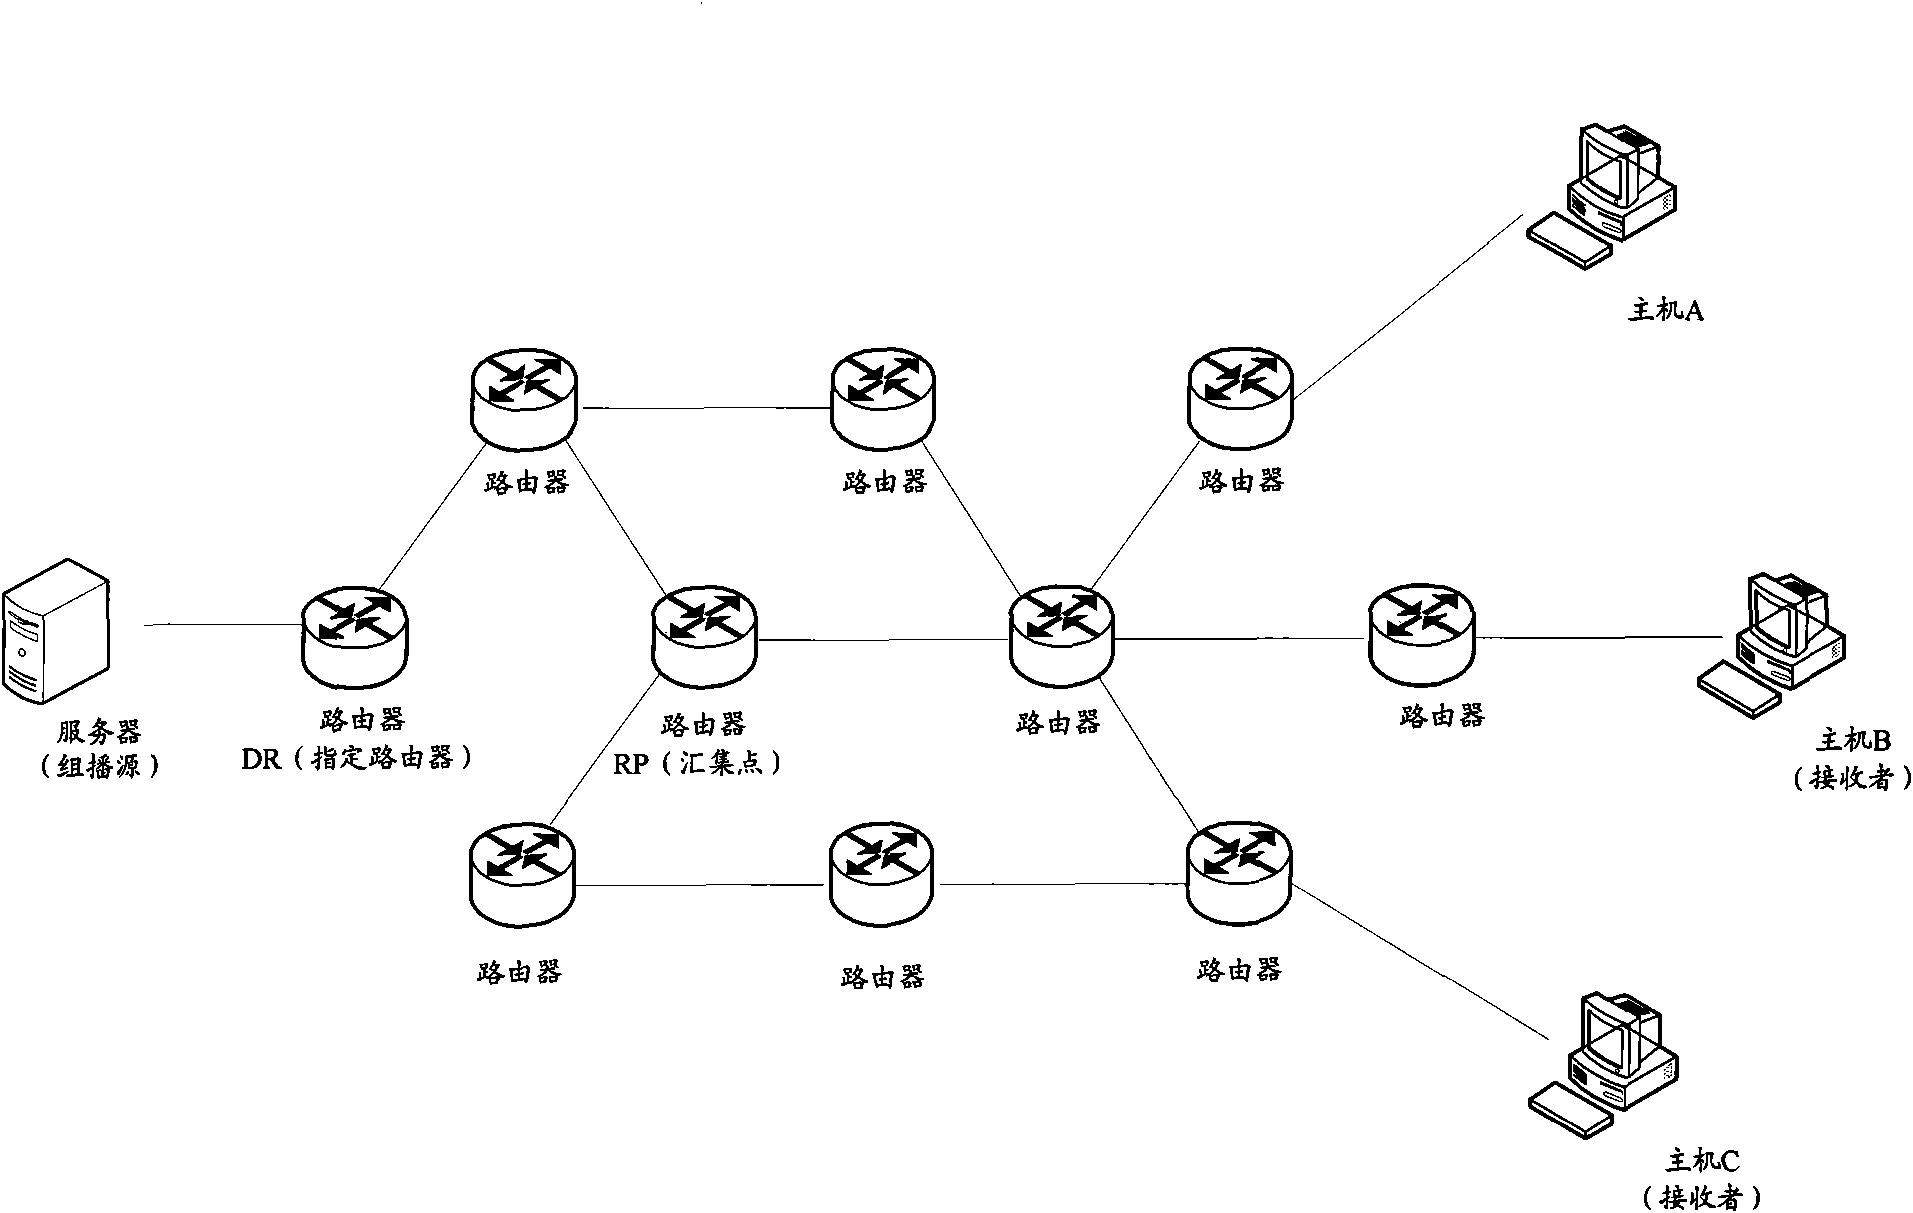 Configuration management method for realizing multicast service sharing among appointed routers and appliance thereof